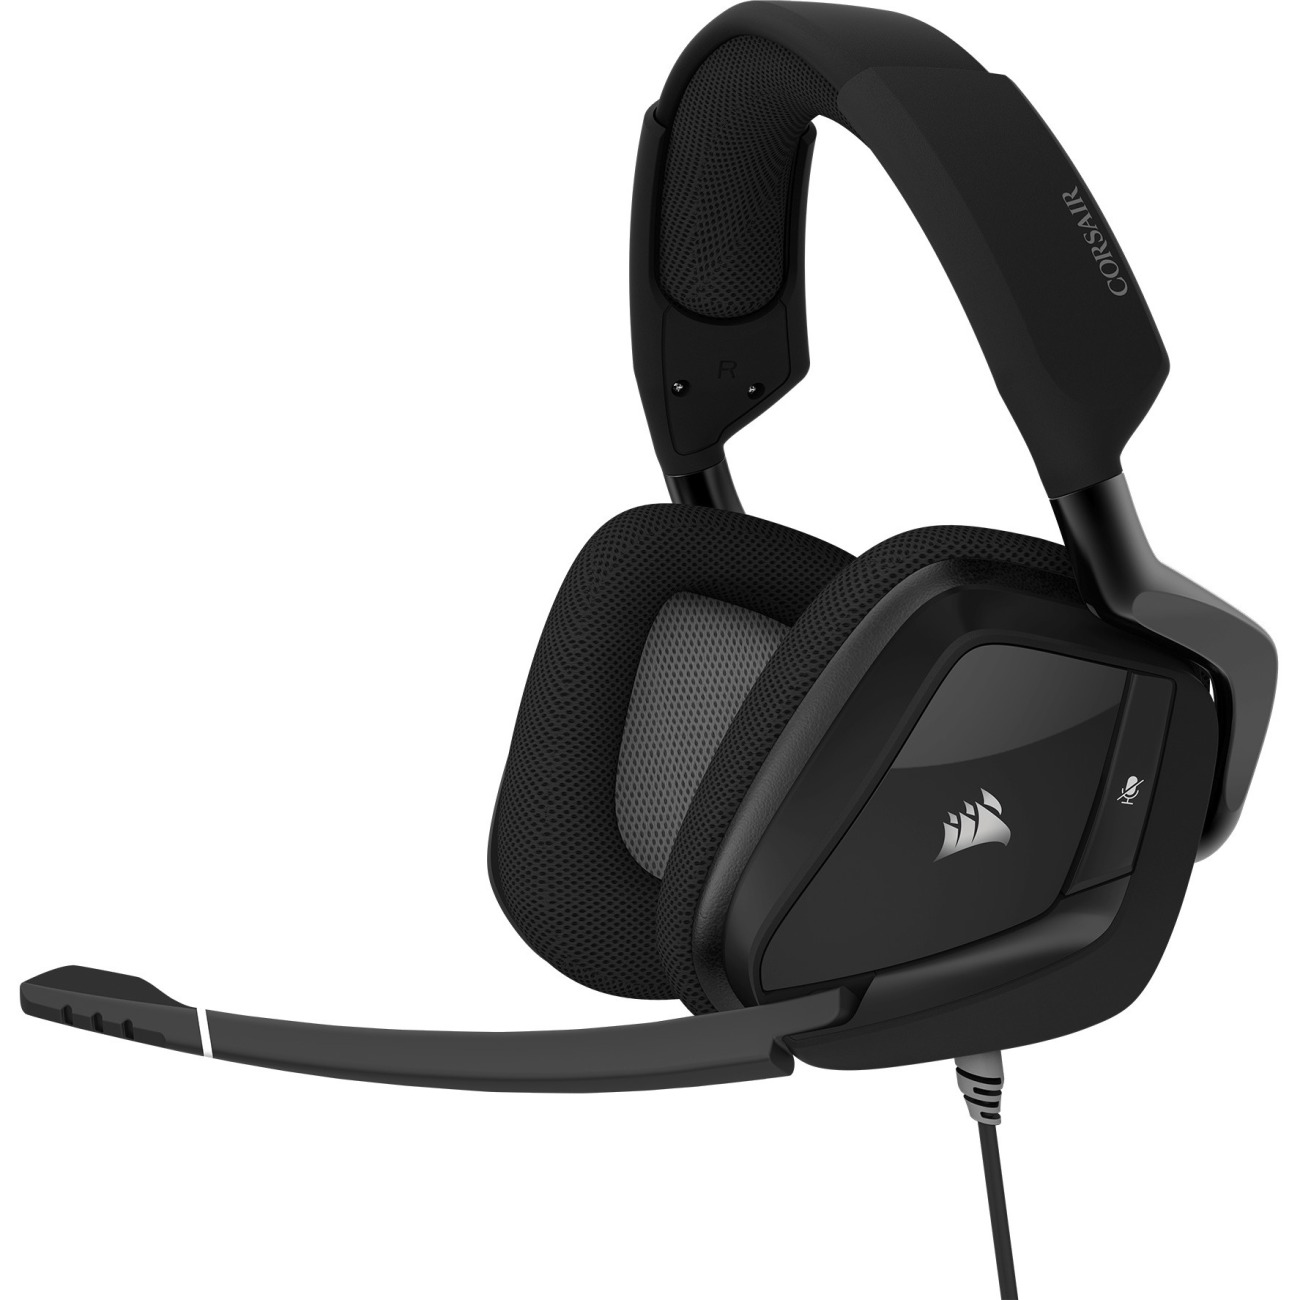 Corsair VOID PRO RGB USB Stereo Gaming Headset - Carbon - image 2 of 6